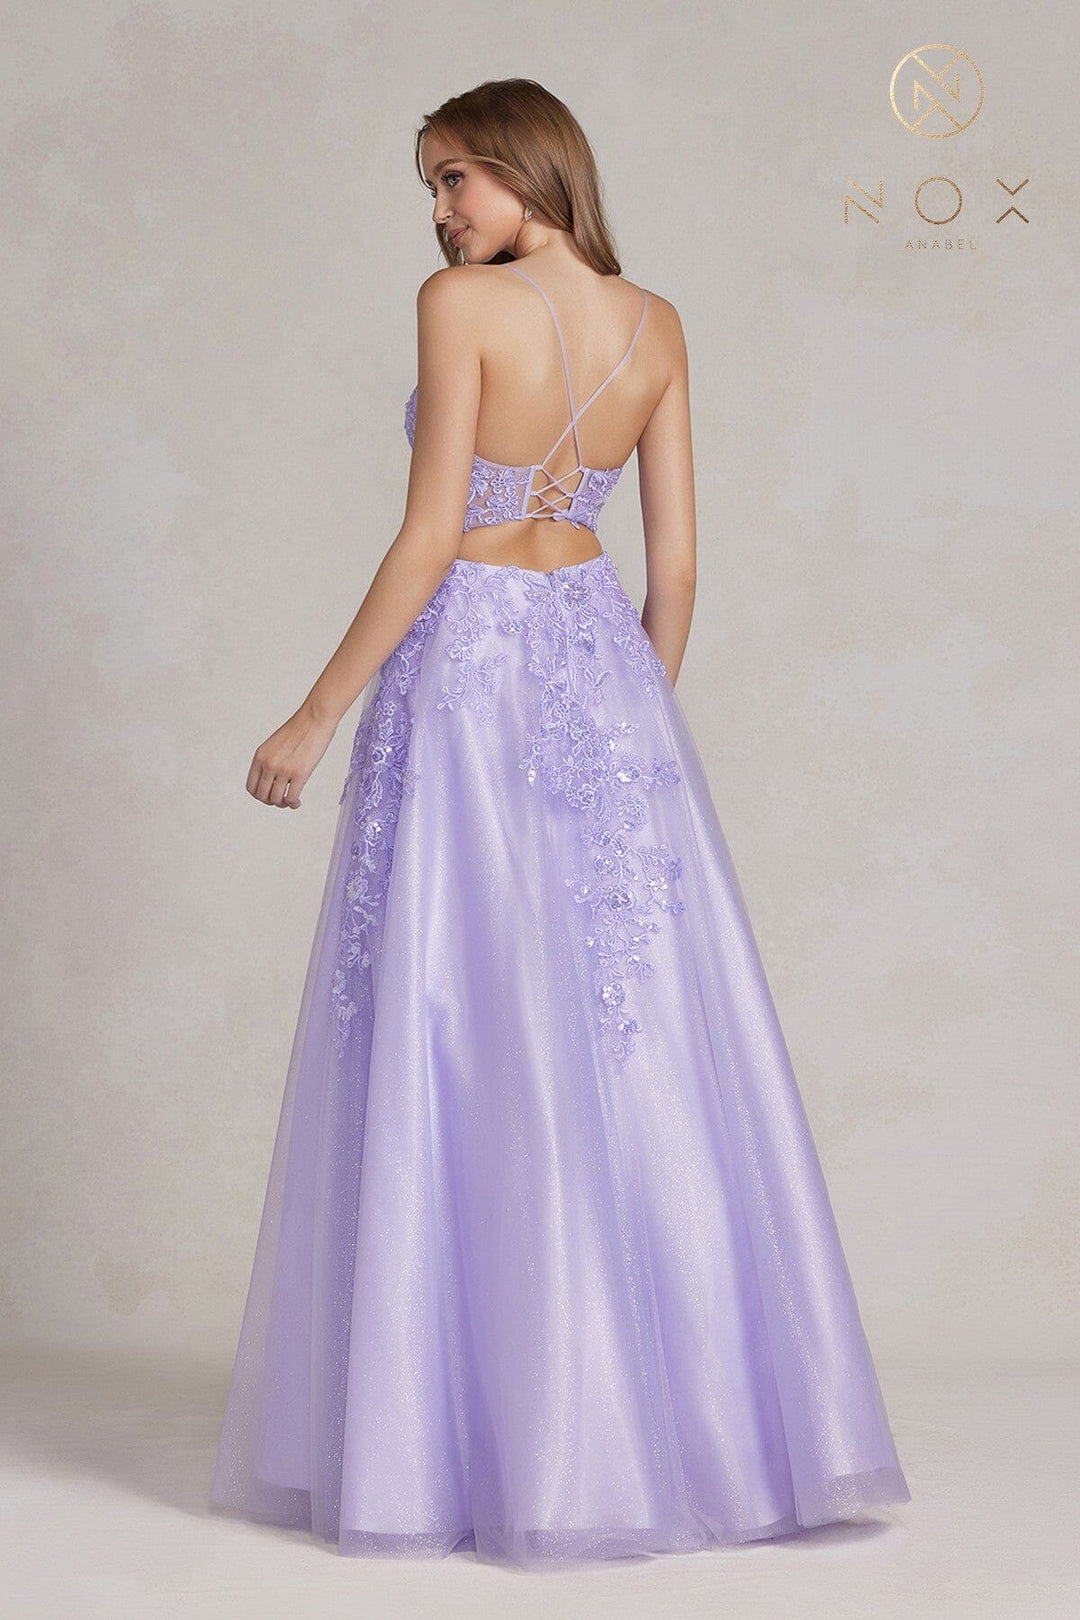 Lace Applique Tulle V-Neck Gown by Nox Anabel E1178